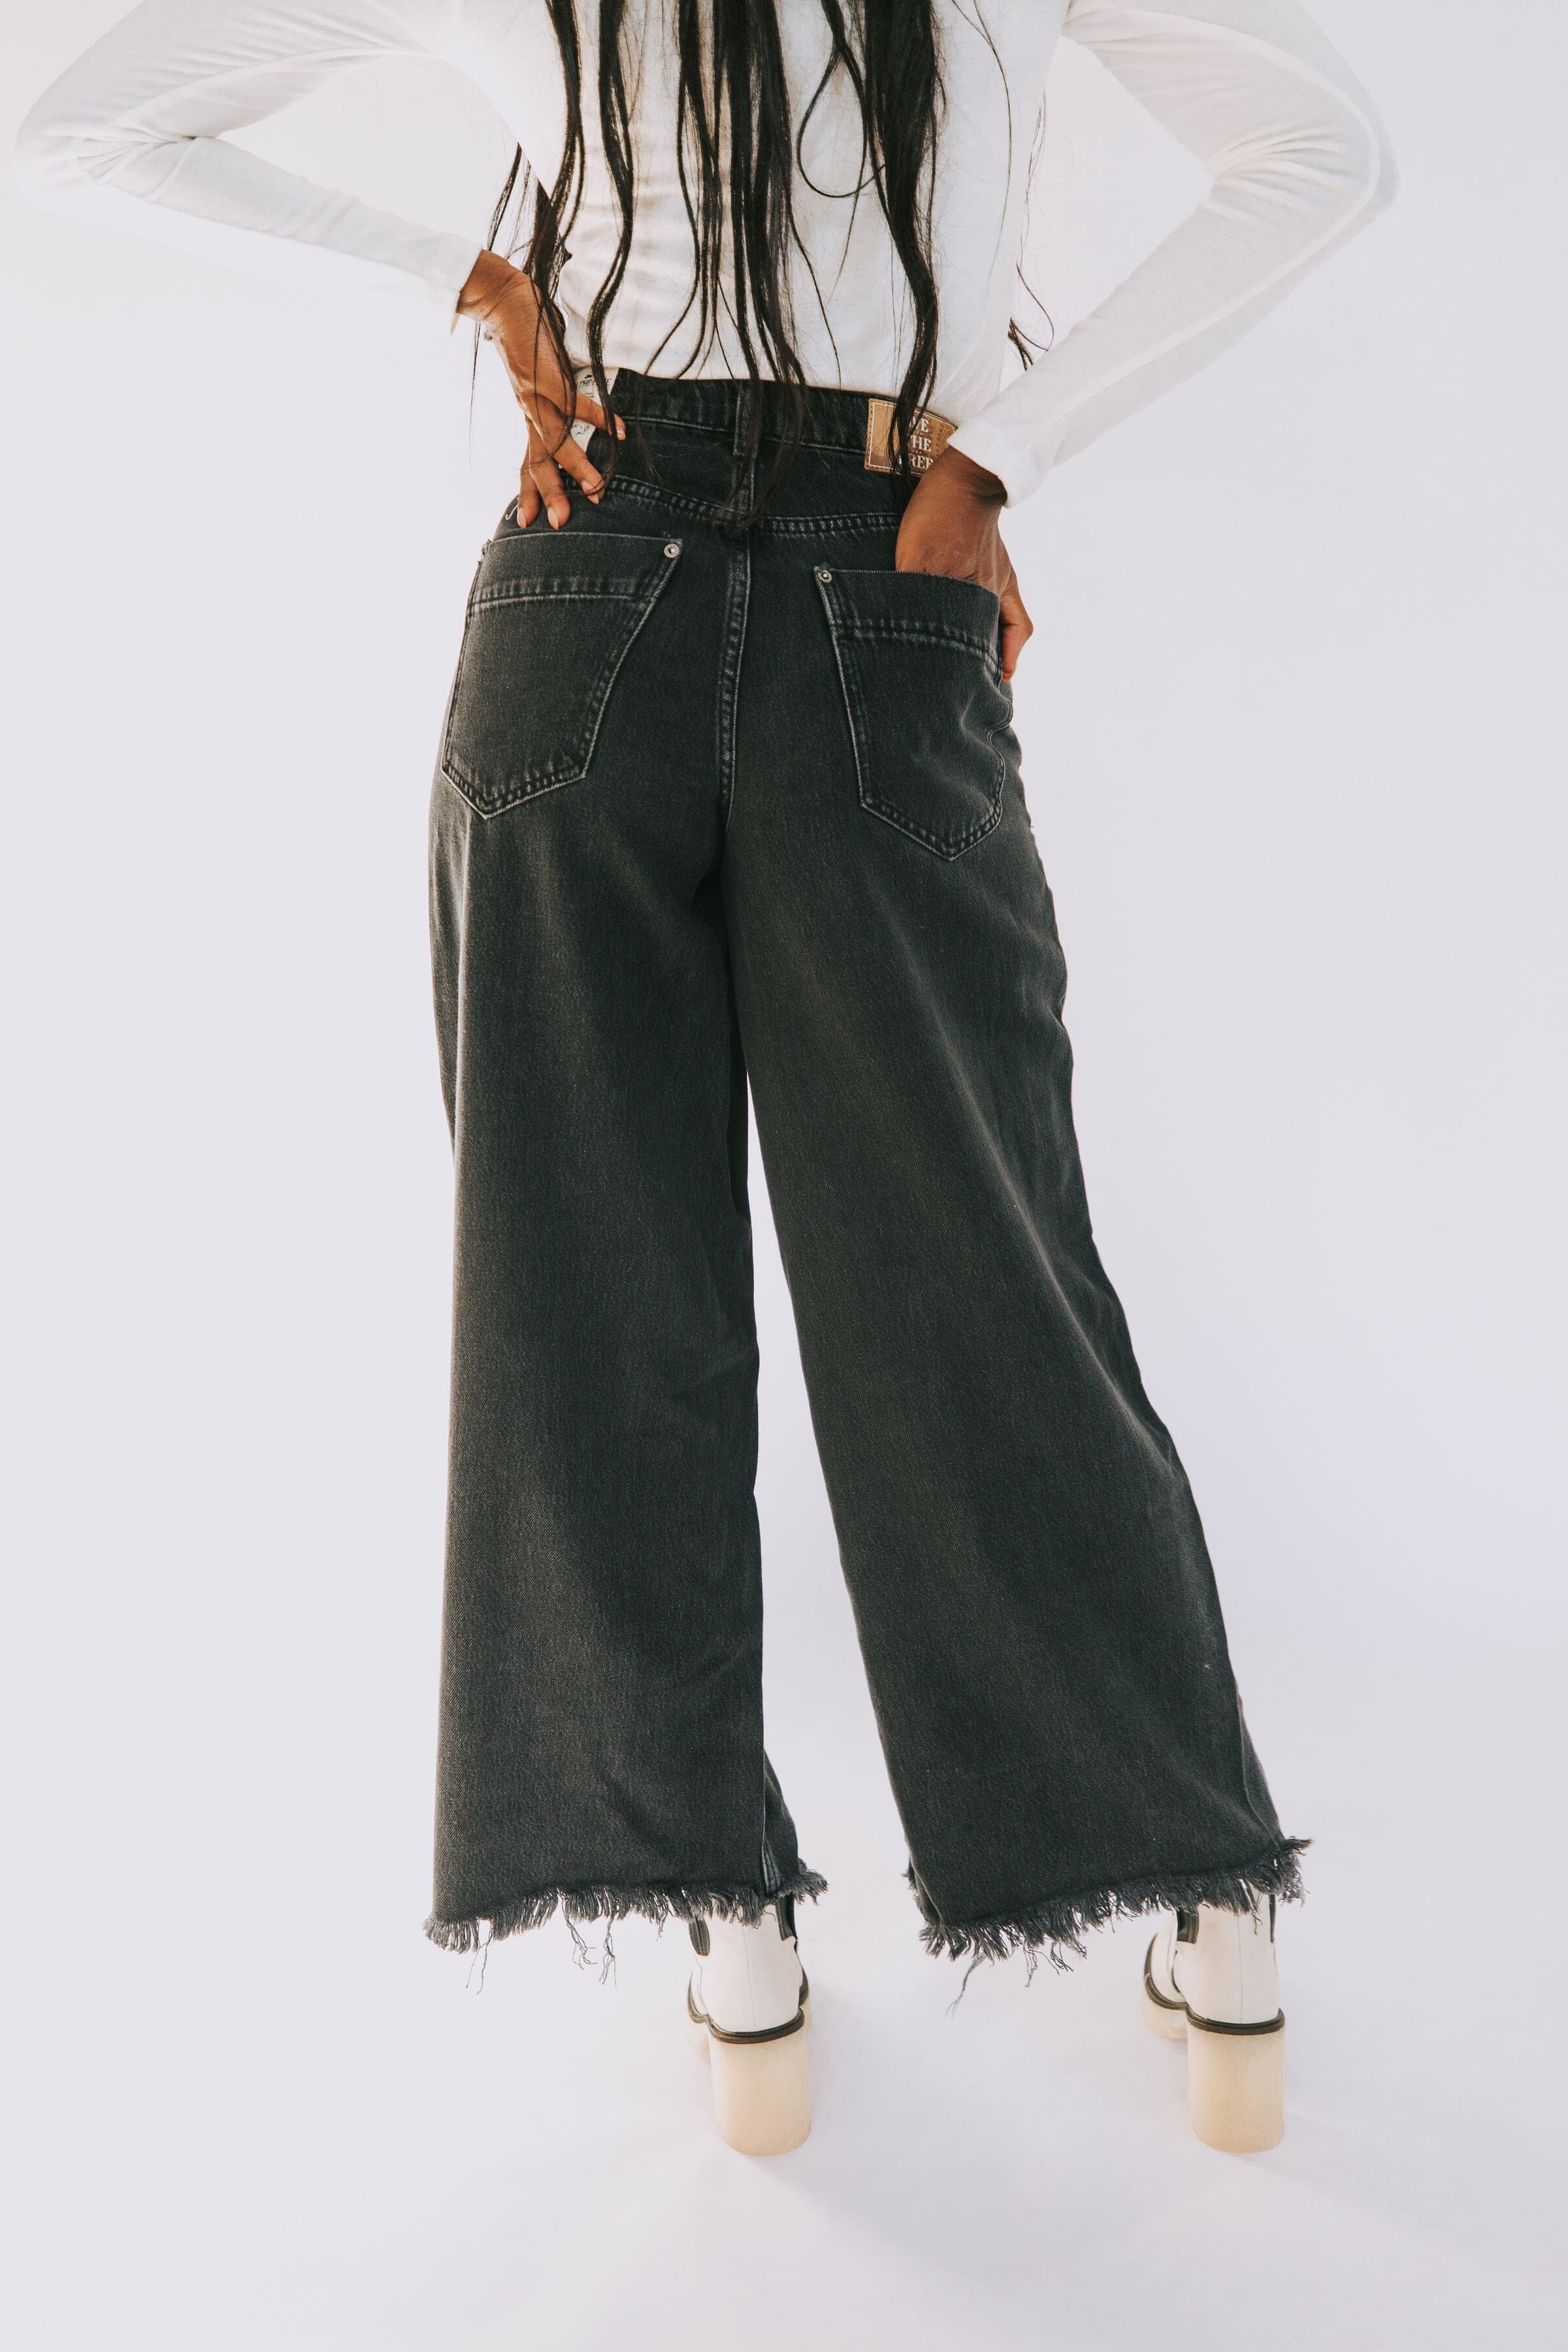 FREE PEOPLE - Old West Slouchy Jeans - 3 Colors!